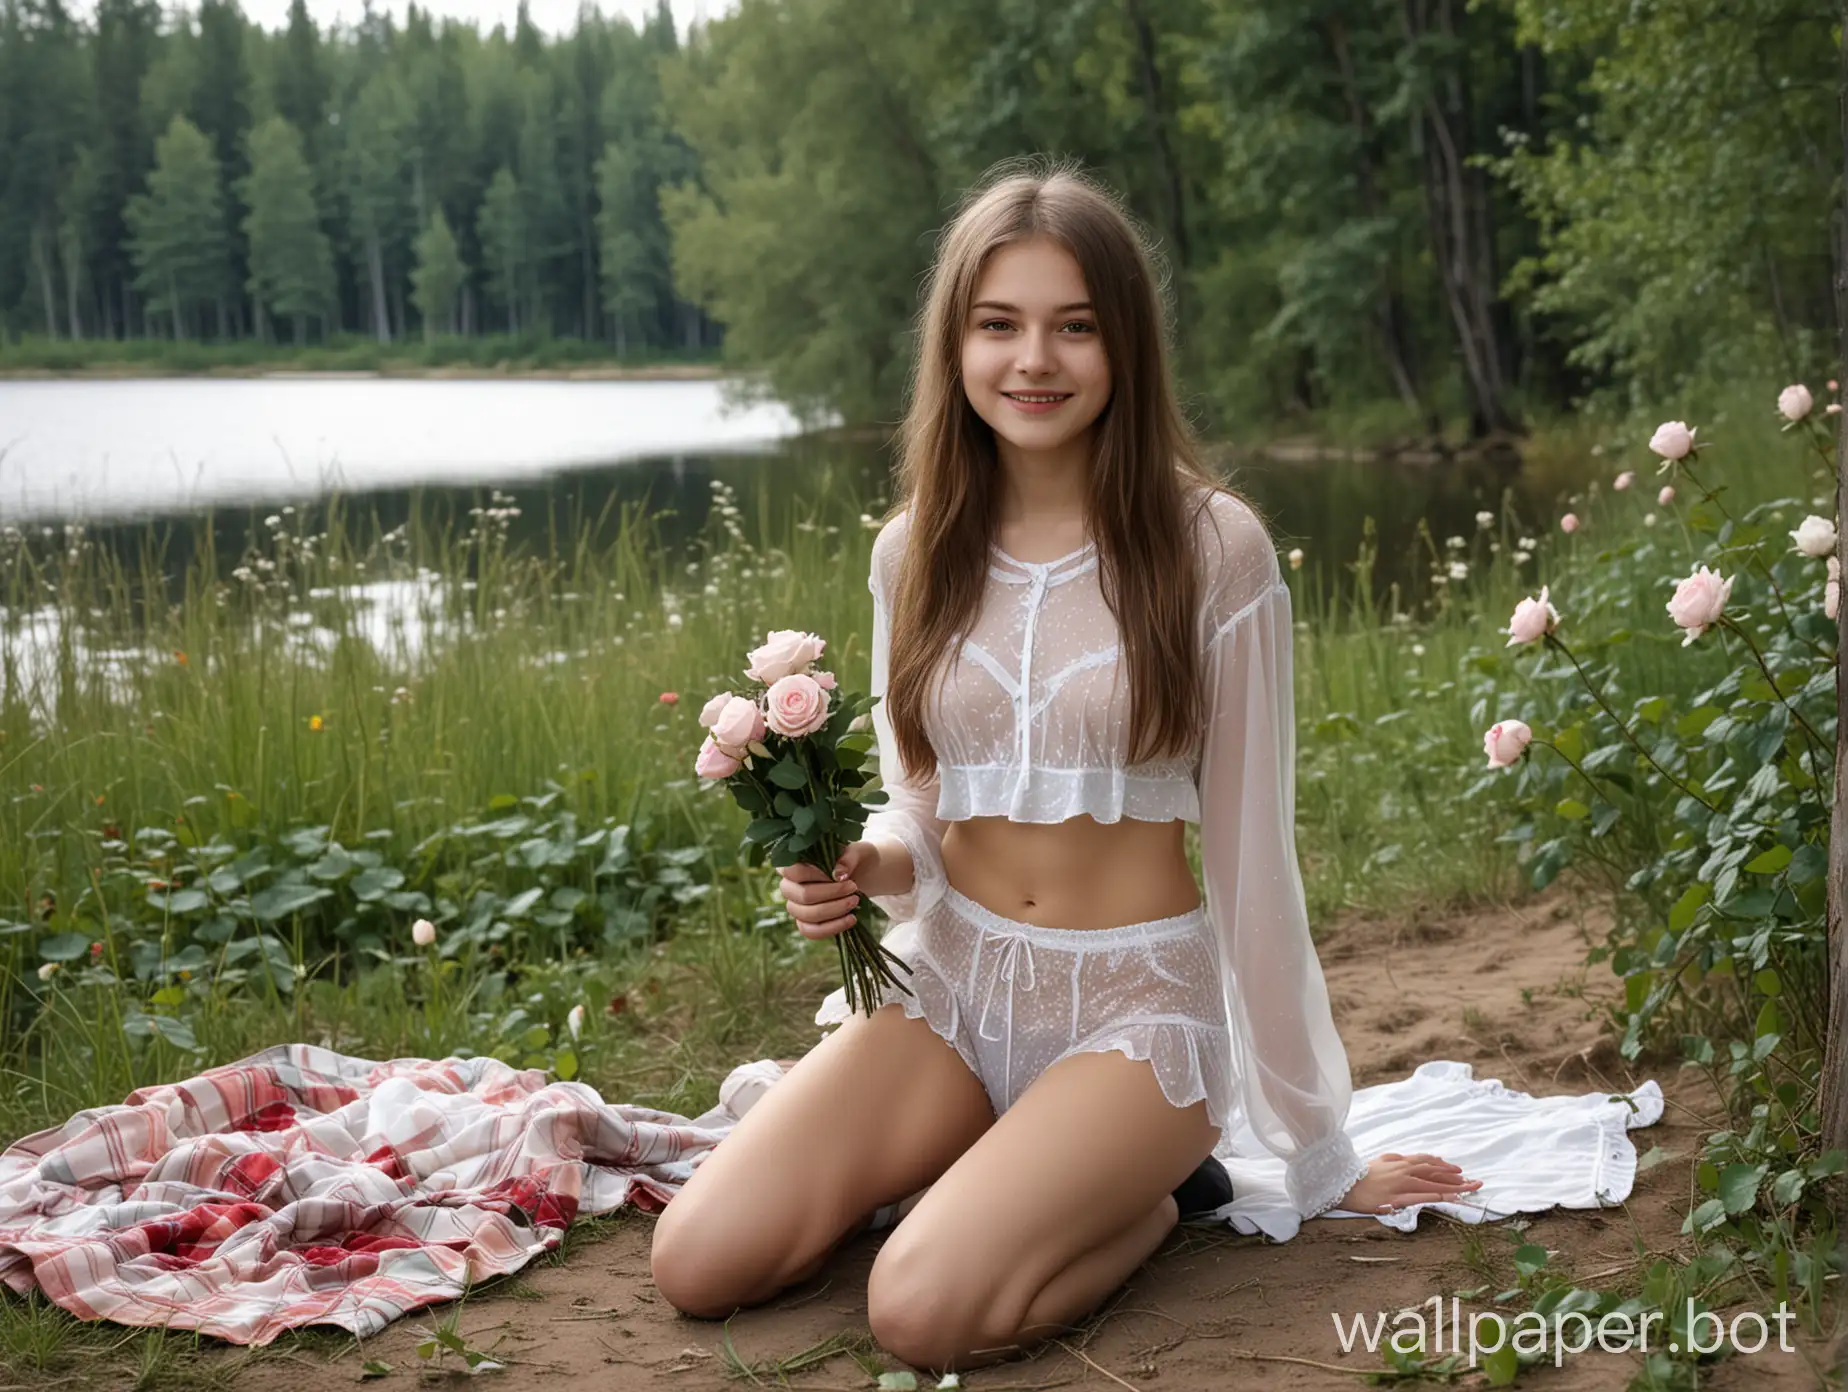 Romantic-Teenage-Date-Moscow-Girl-in-Translucent-Underwear-with-Roses